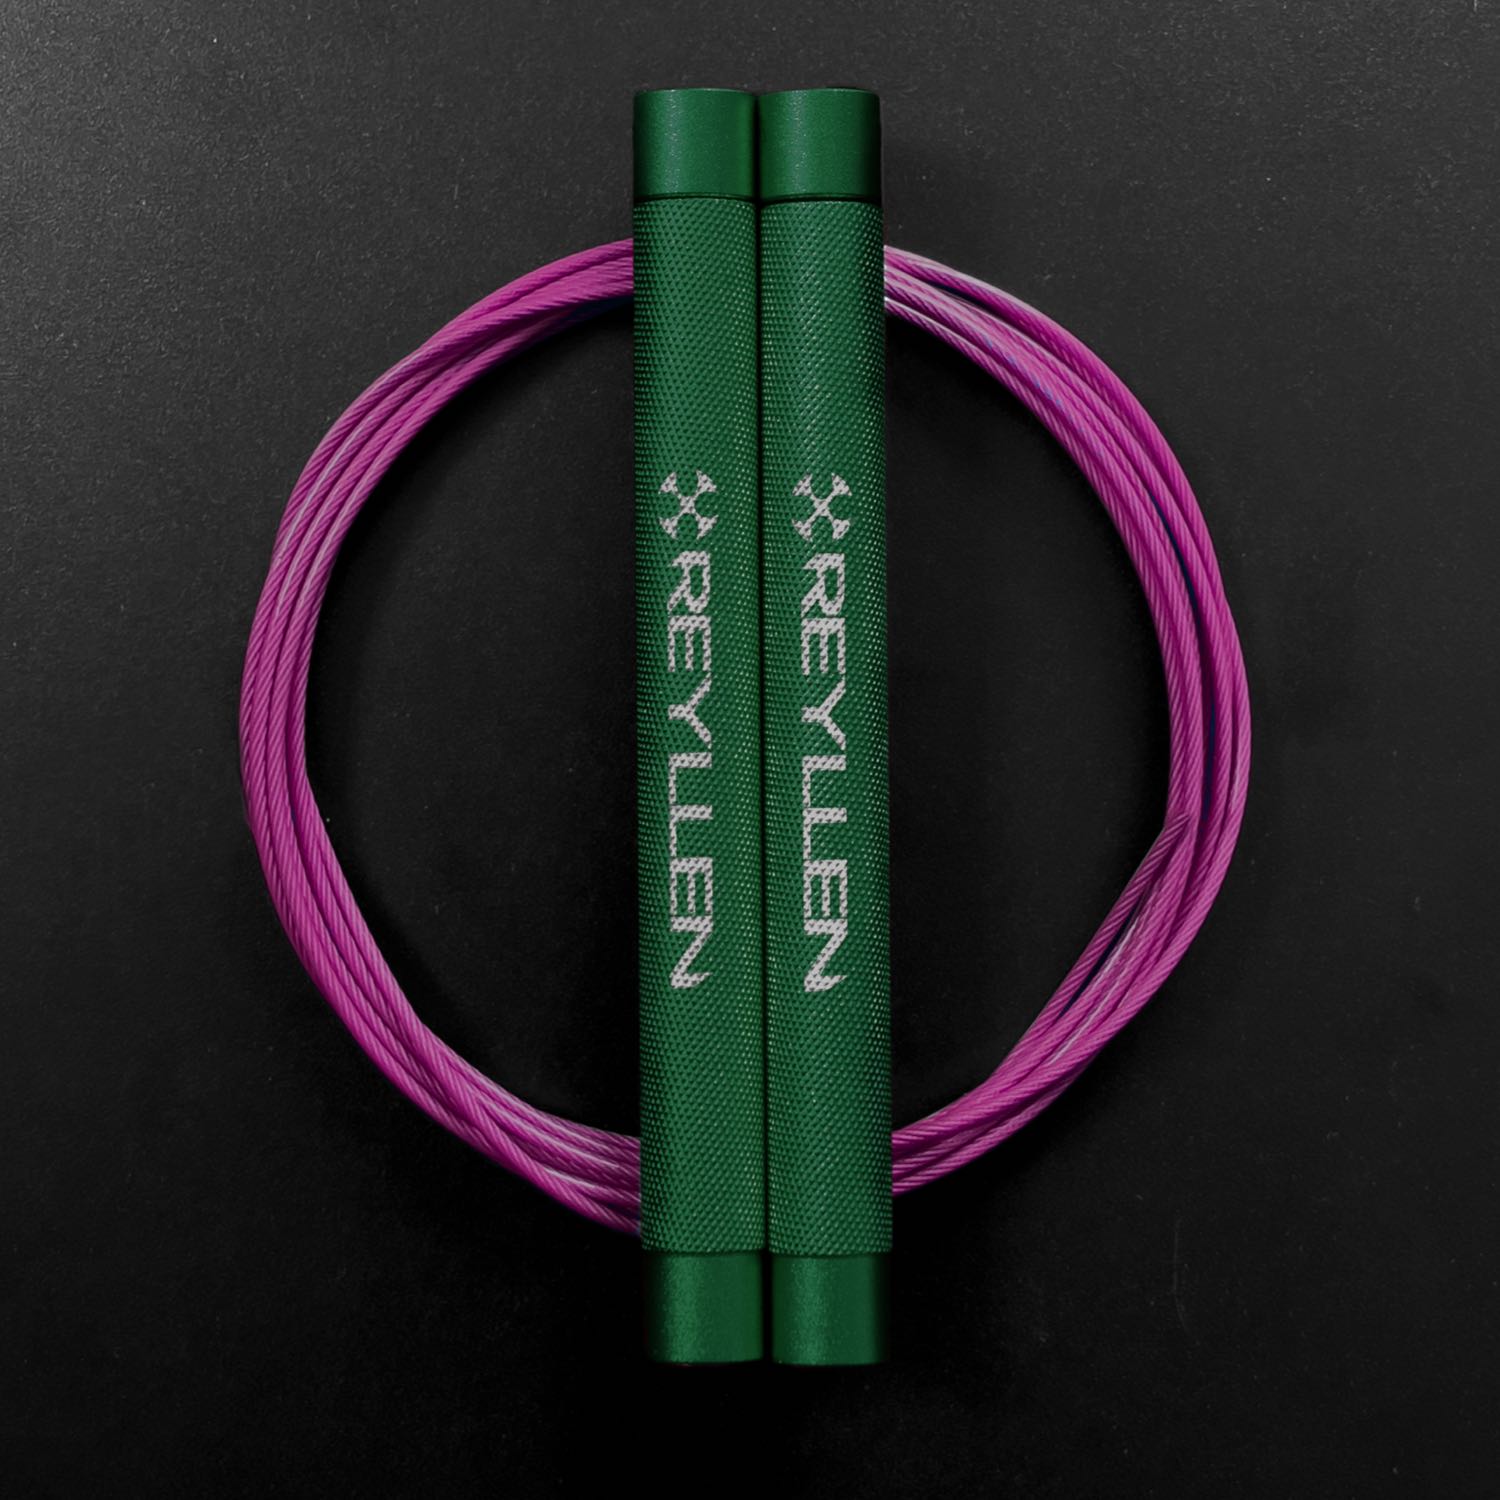 Reyllen Flare Mx Speed Skipping Jump Rope - Aluminium Handles - green with pink nylon coated cable